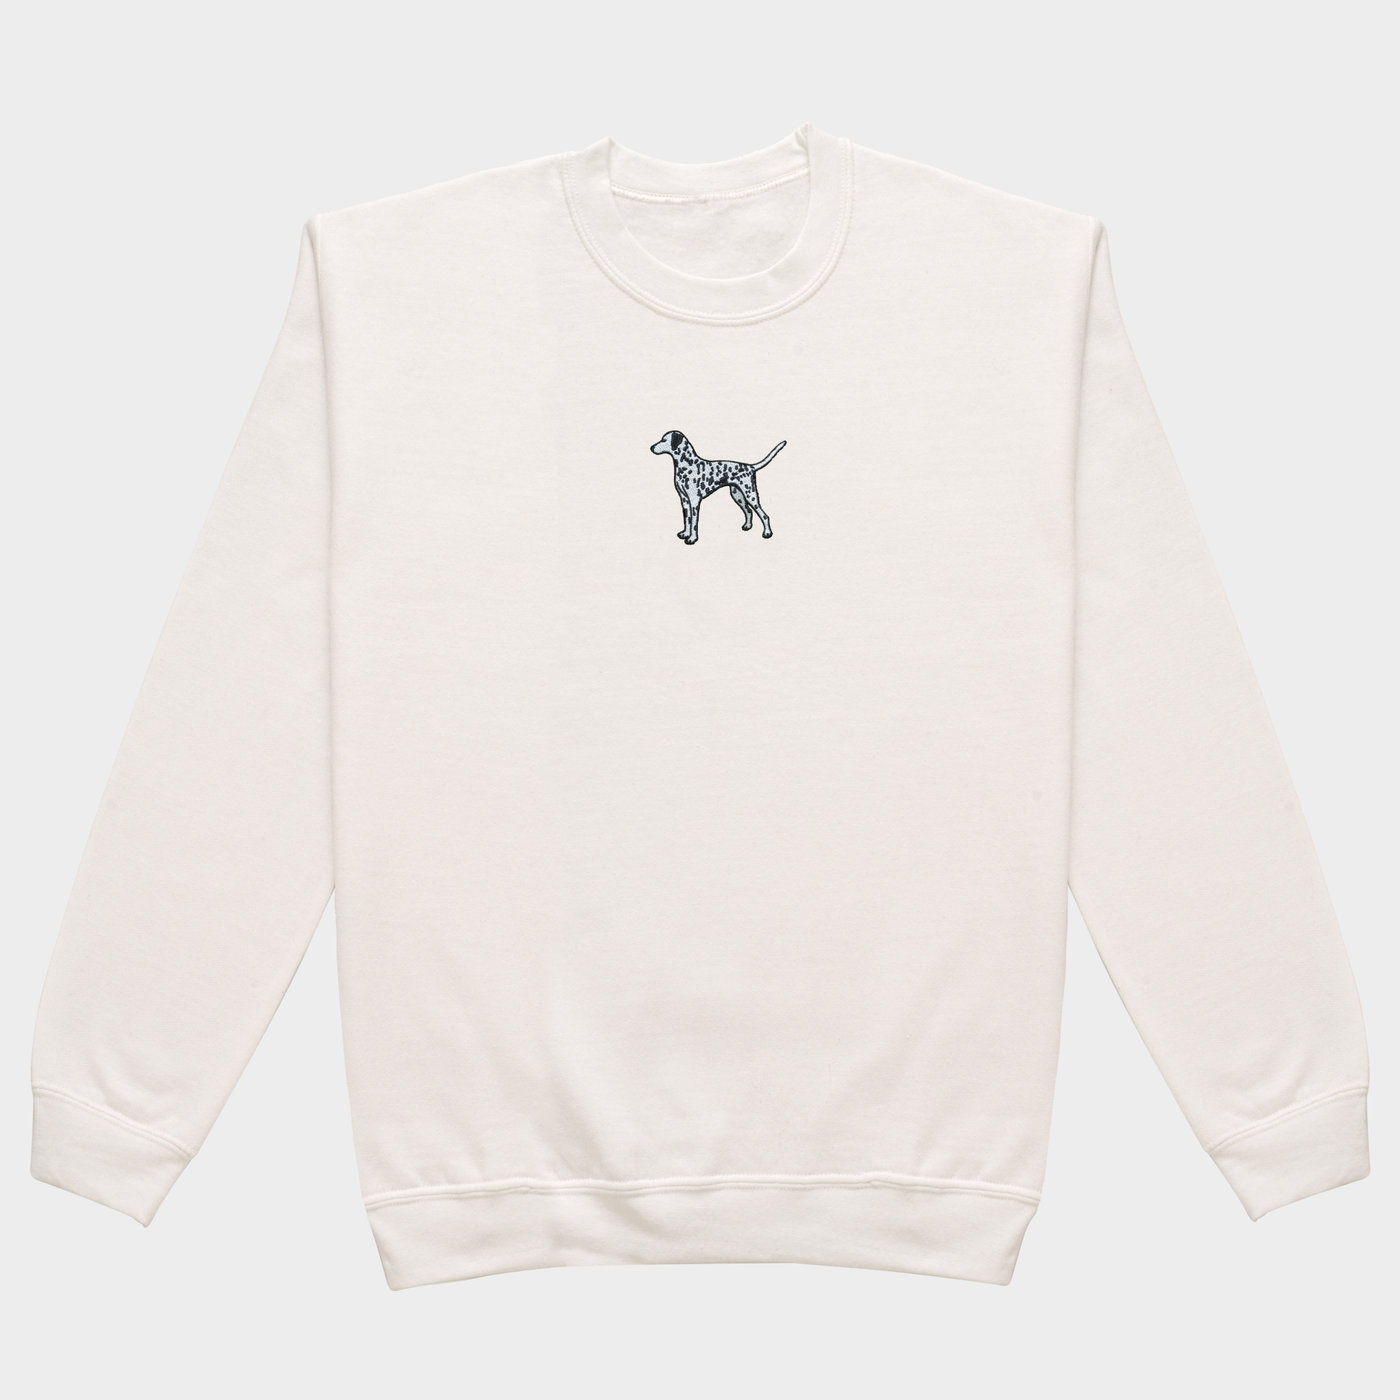 Bobby's Planet Men's Embroidered Dalmatian Sweatshirt from Paws Dog Cat Animals Collection in White Color#color_white